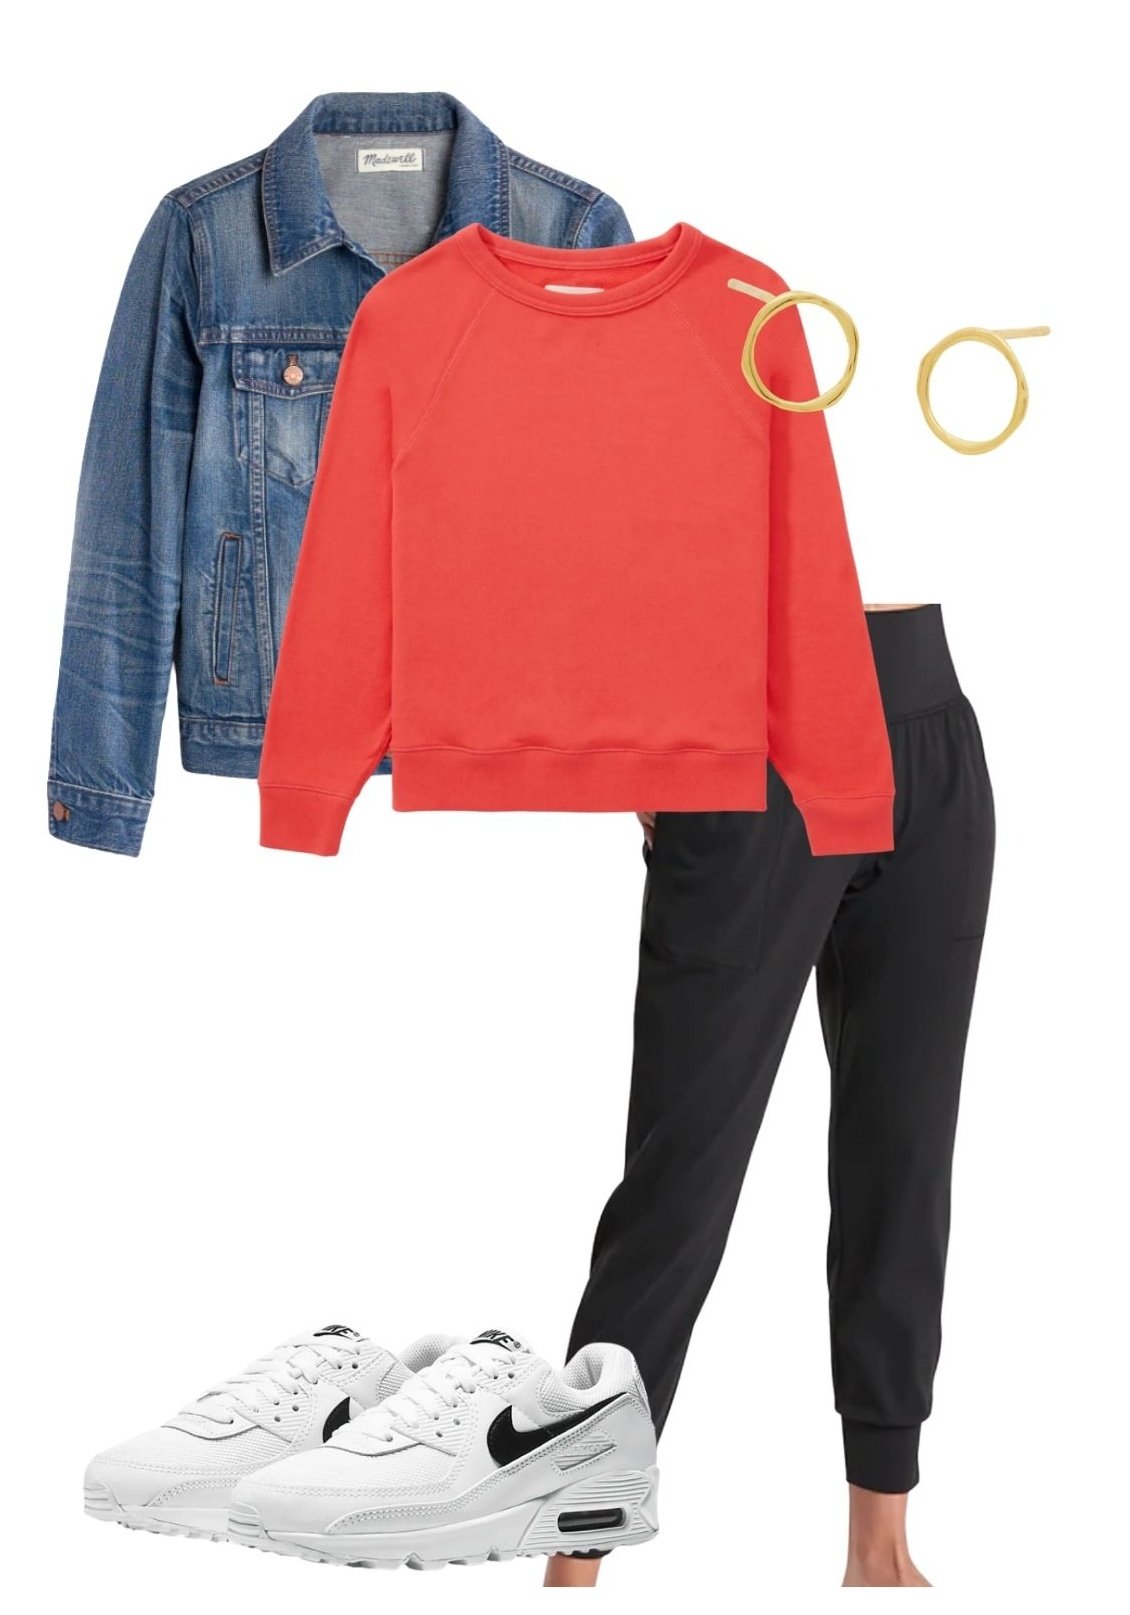 Cute Athleisure Outfit Ideas for cold weather